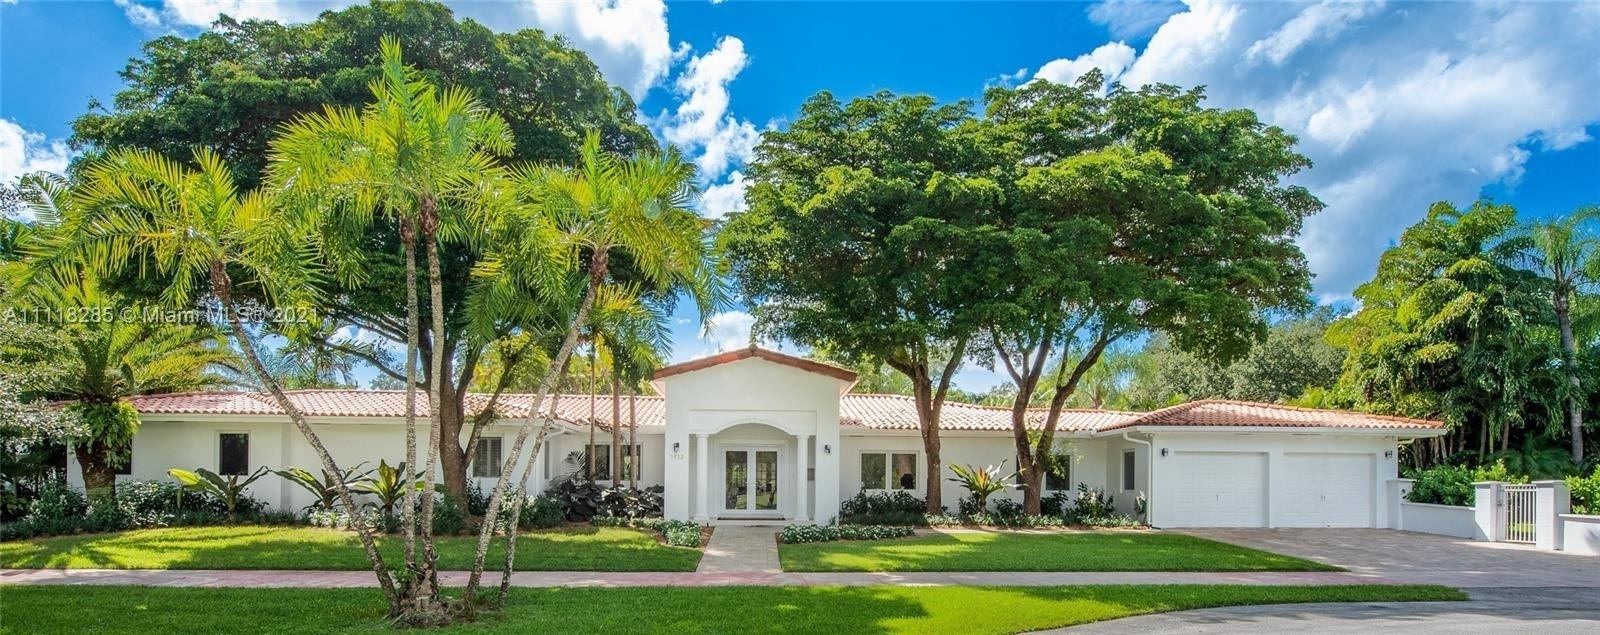 Property в Country Club Section, Coral Gables, FL 33134